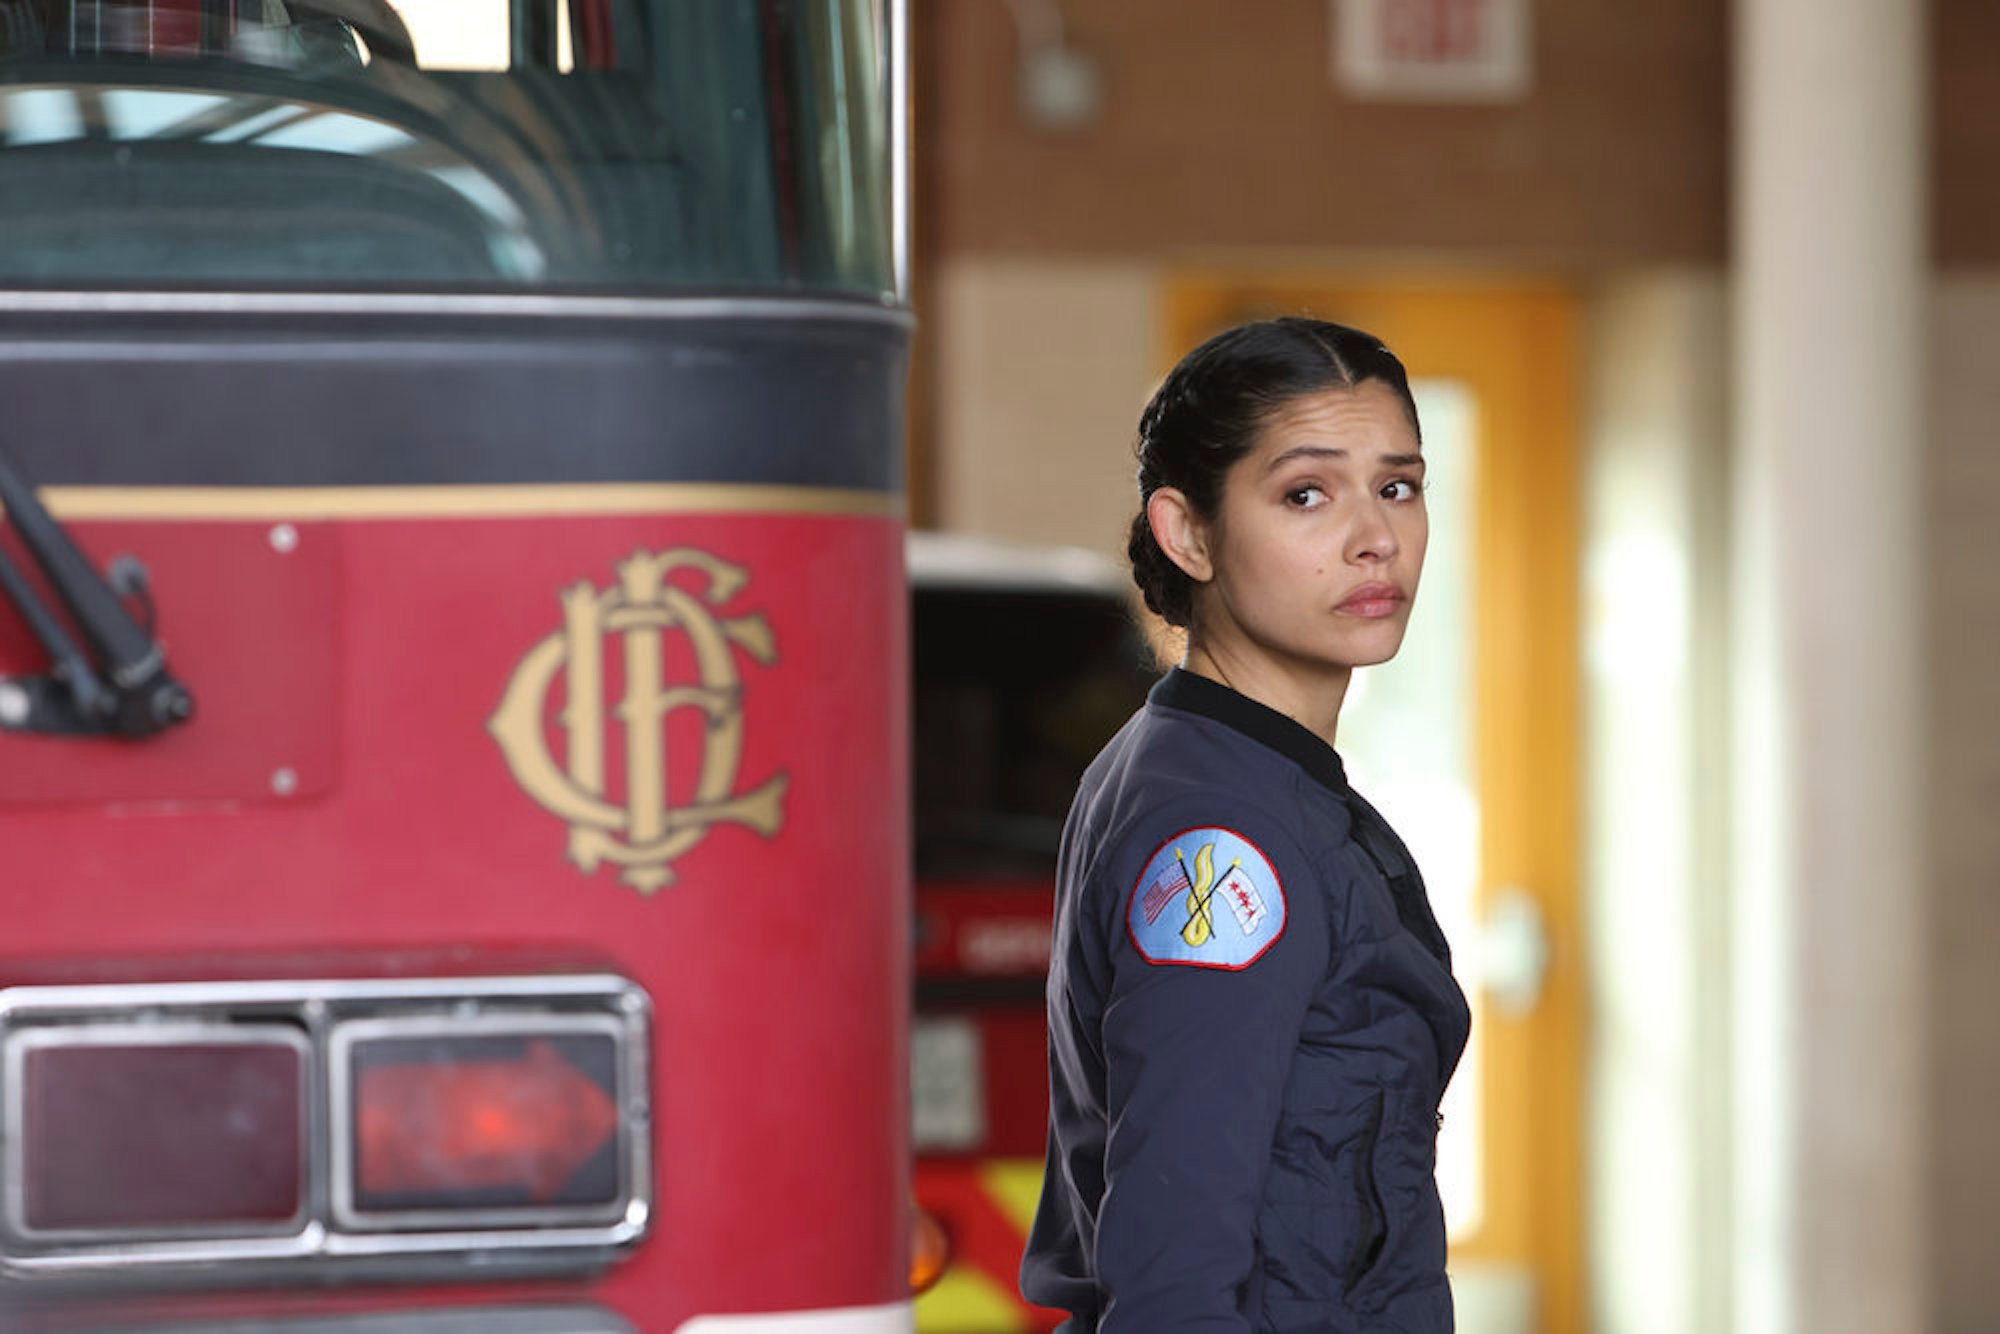 Miranda Rae Mayo as Stella Kidd looking over her shoulder next to a fire truck in 'Chicago Fire' Season 10